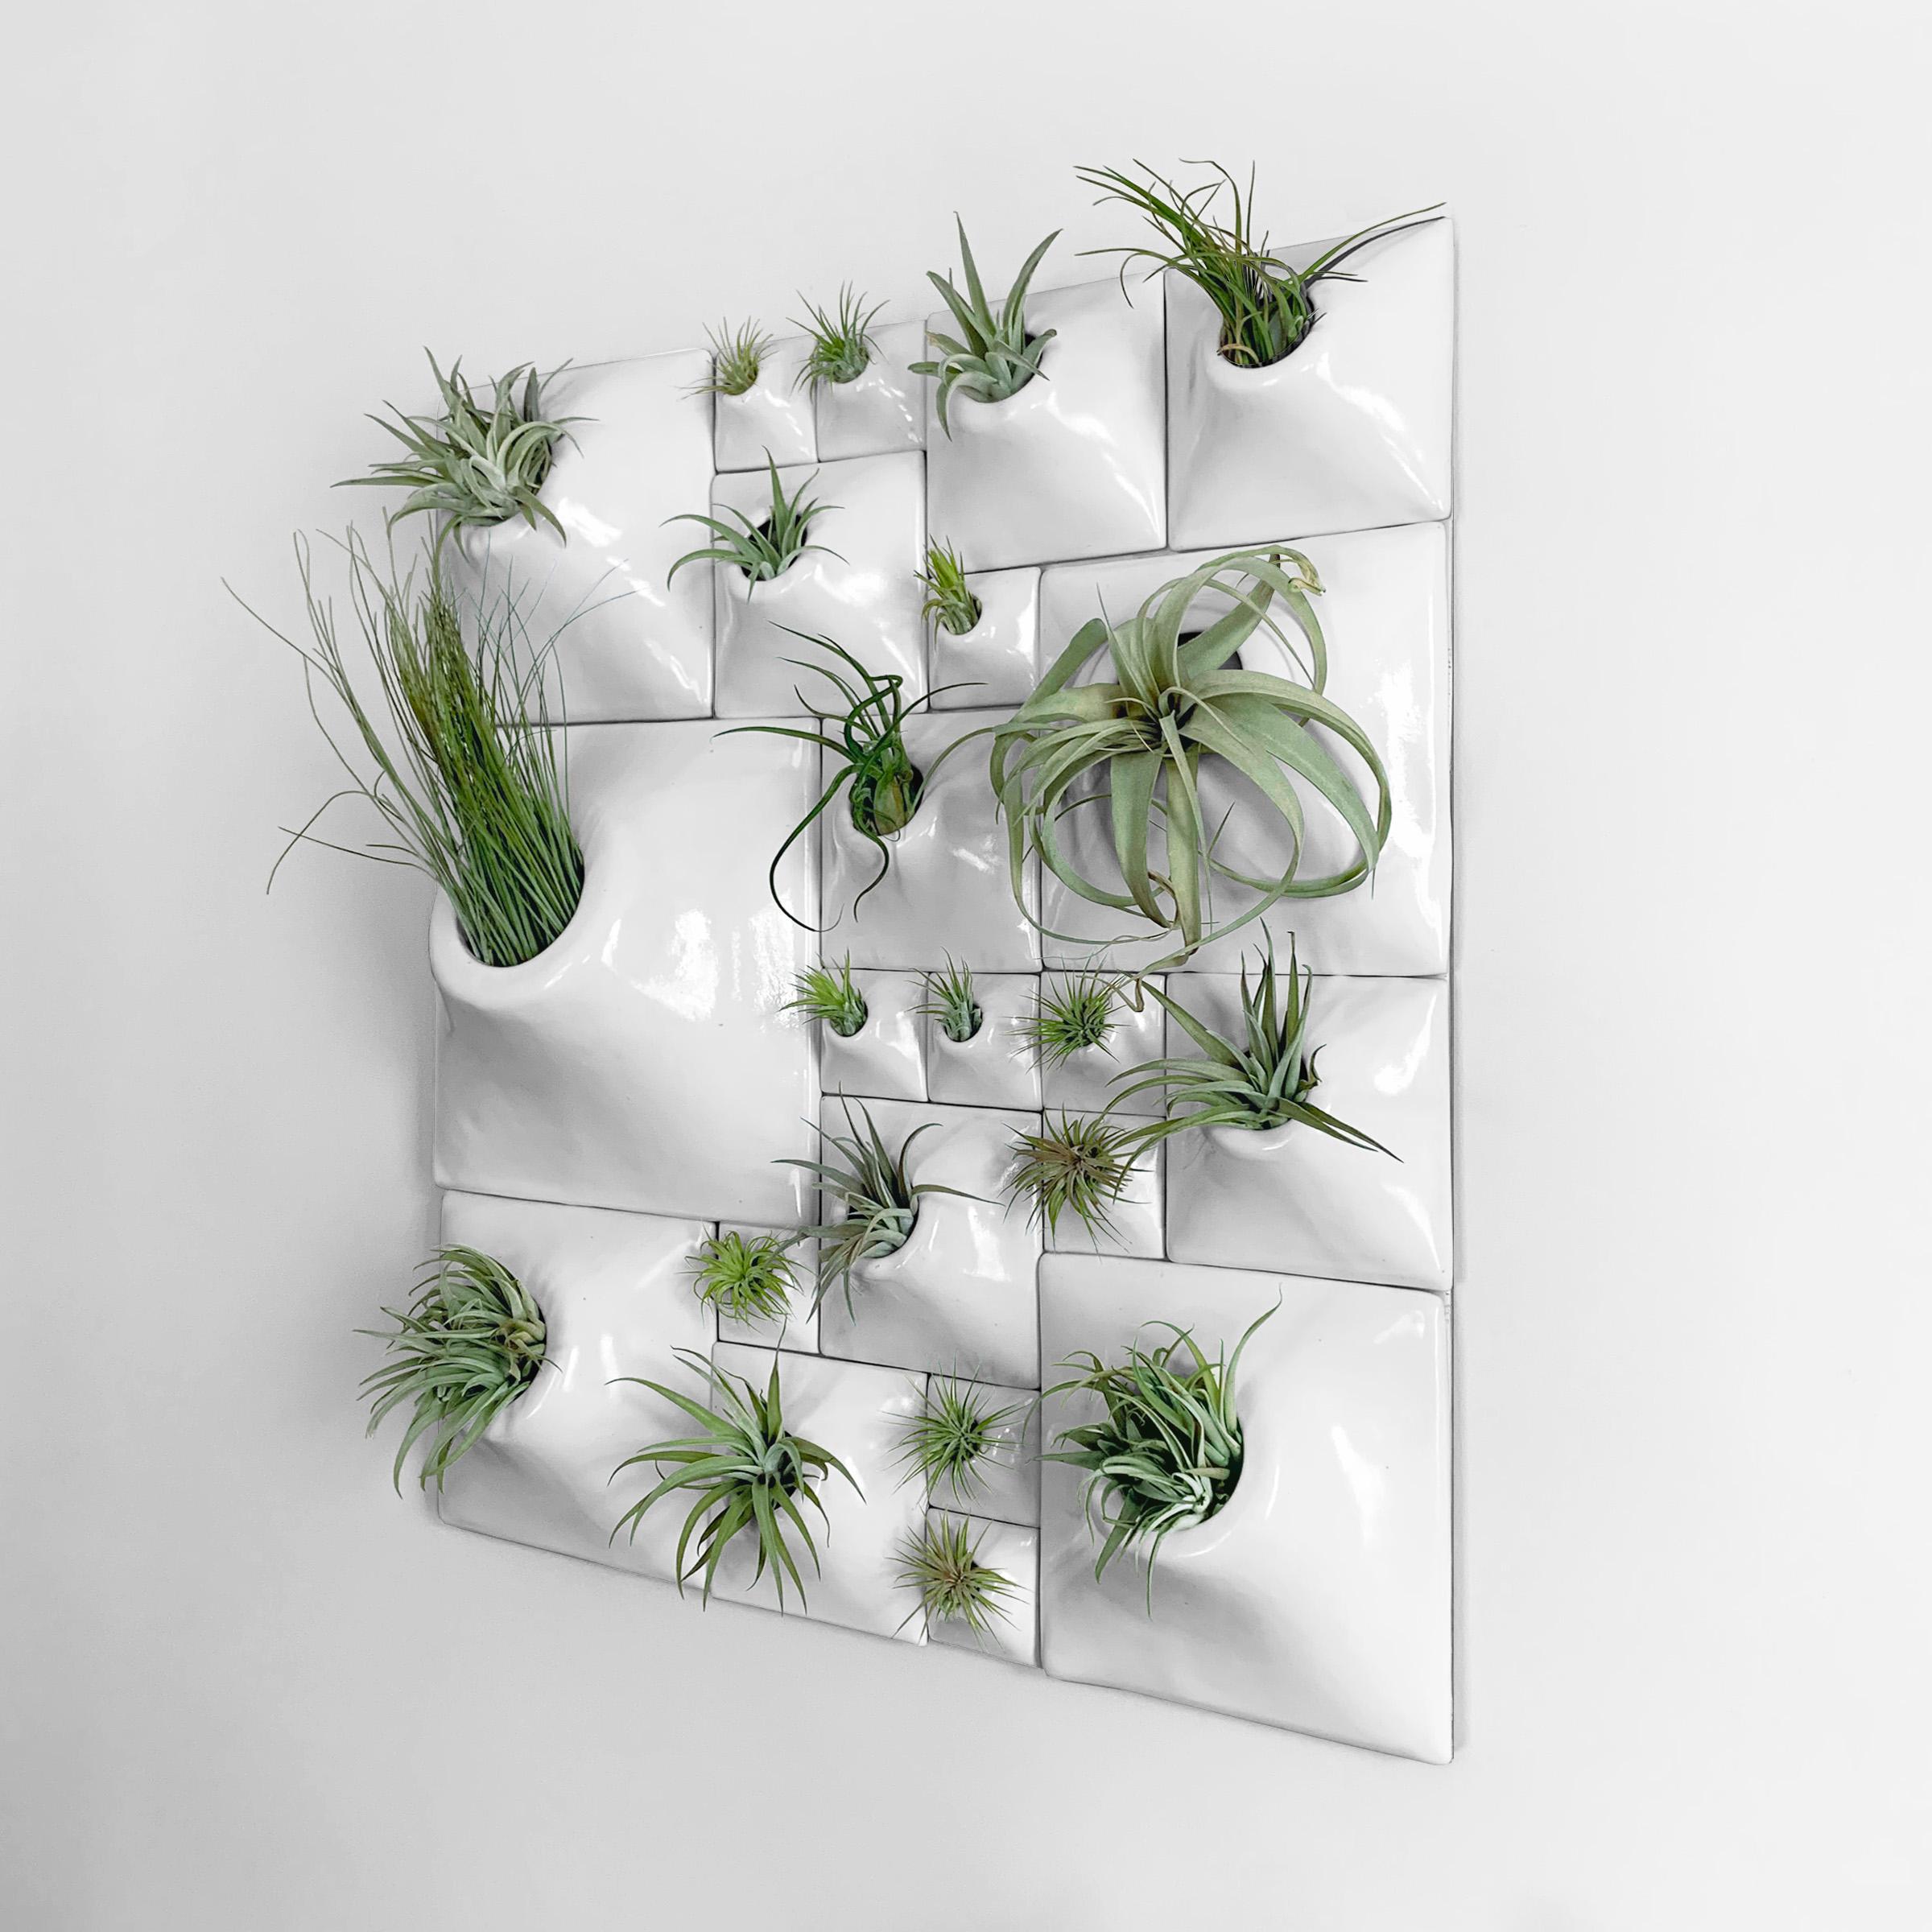 Modern Greenwall Sculpture, Plant Wall Art, Biophilic Wall Decor, Price / Sq Ft For Sale 2